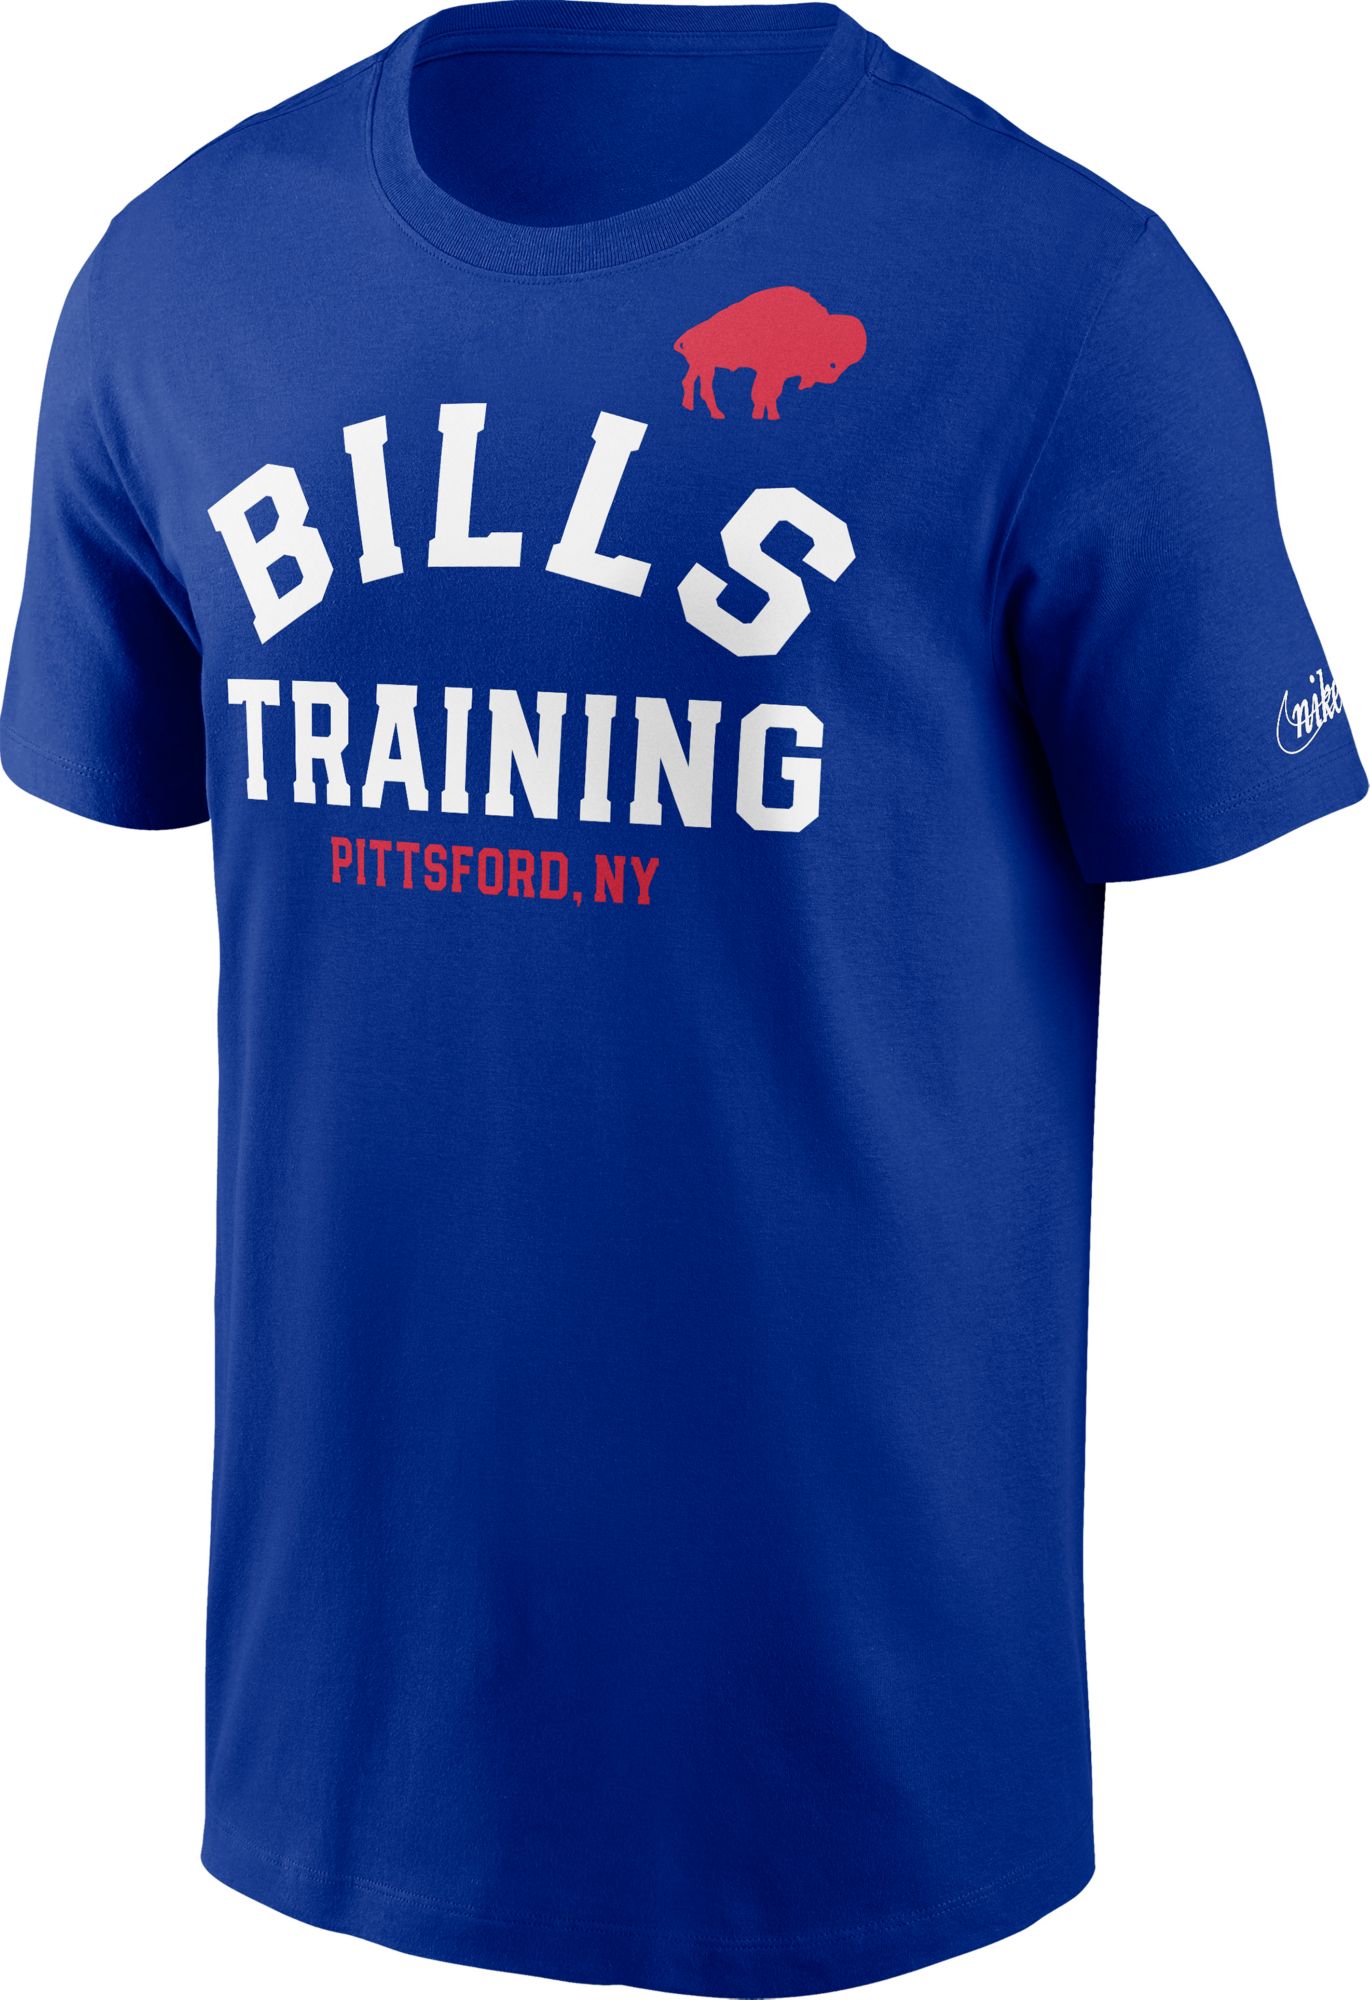 NFL Shop, NFL Gear & Apparel  In-Store Pickup Available at DICK'S